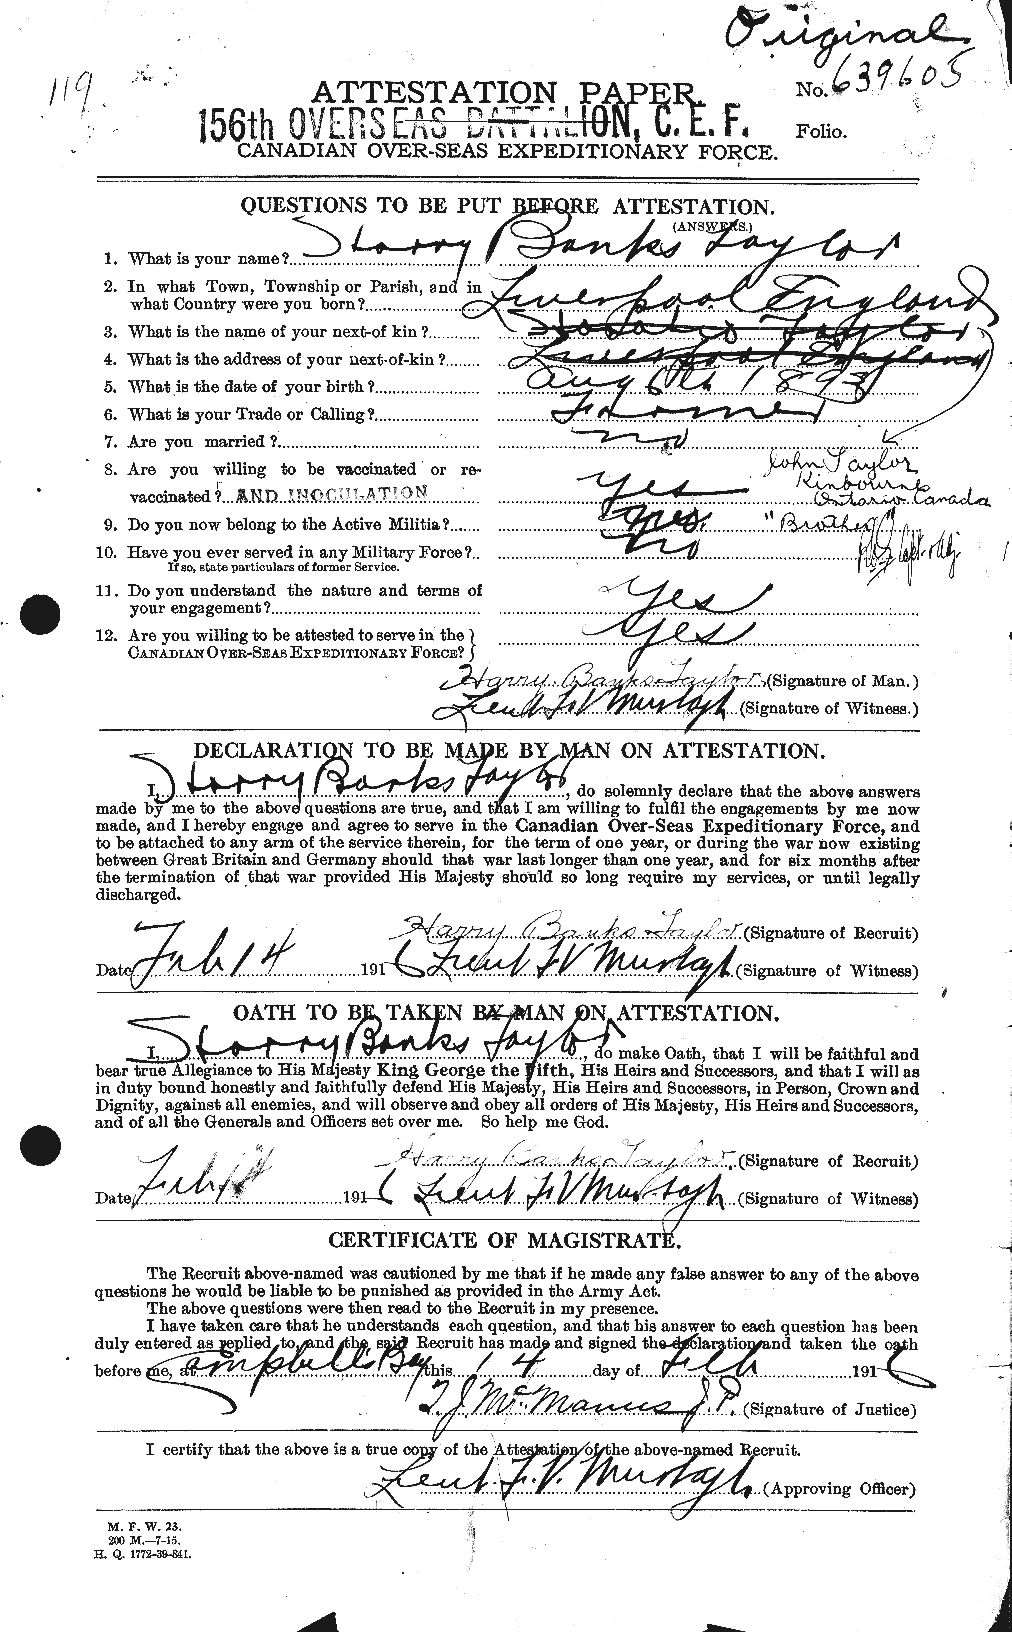 Personnel Records of the First World War - CEF 626484a